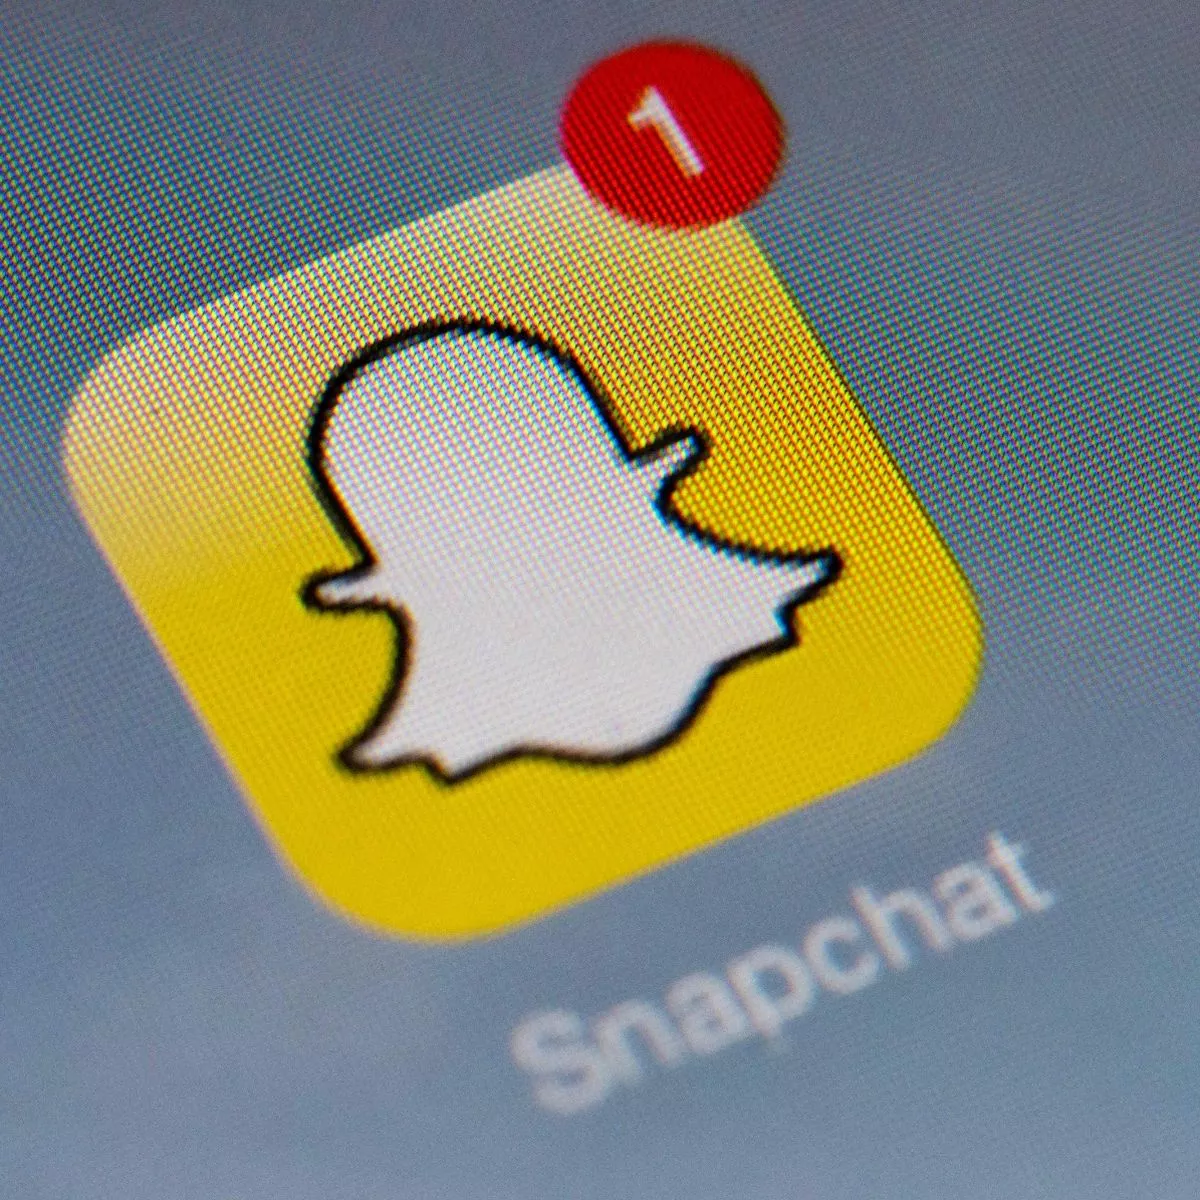 Snapchat’s ‘My AI’ chatbot can now set in-app reminders and countdowns